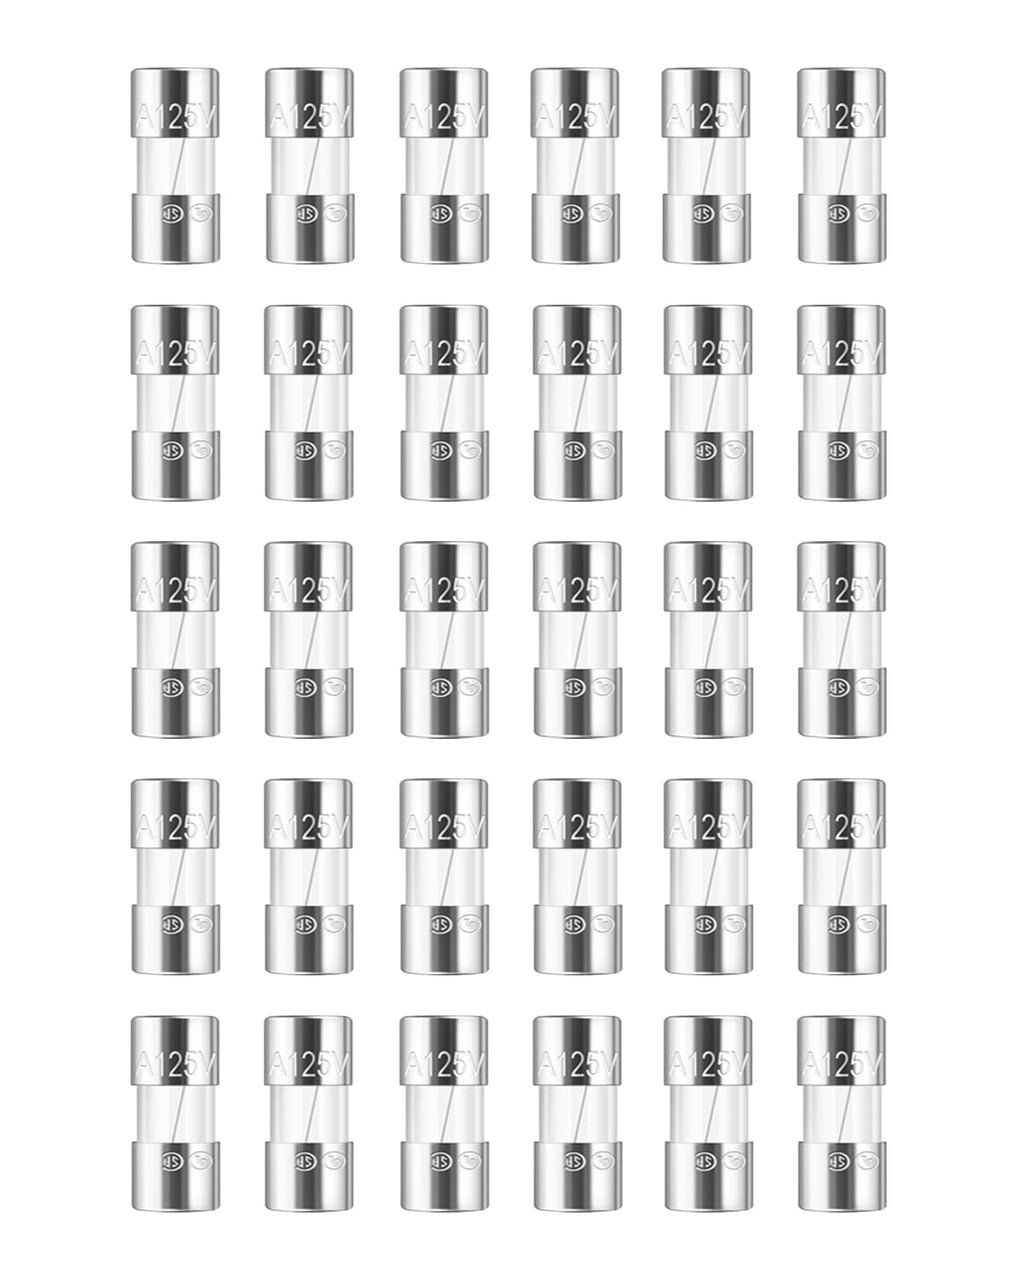  [AUSTRALIA] - 30Pcs 3A 125V Christmas Light Fuse - 0.14 x 0.39 inch Christmas Light Strings Glass Fuse, Mini Glass Fuse for Outdoor String Lights 3A-0.14 x 0.39 inch